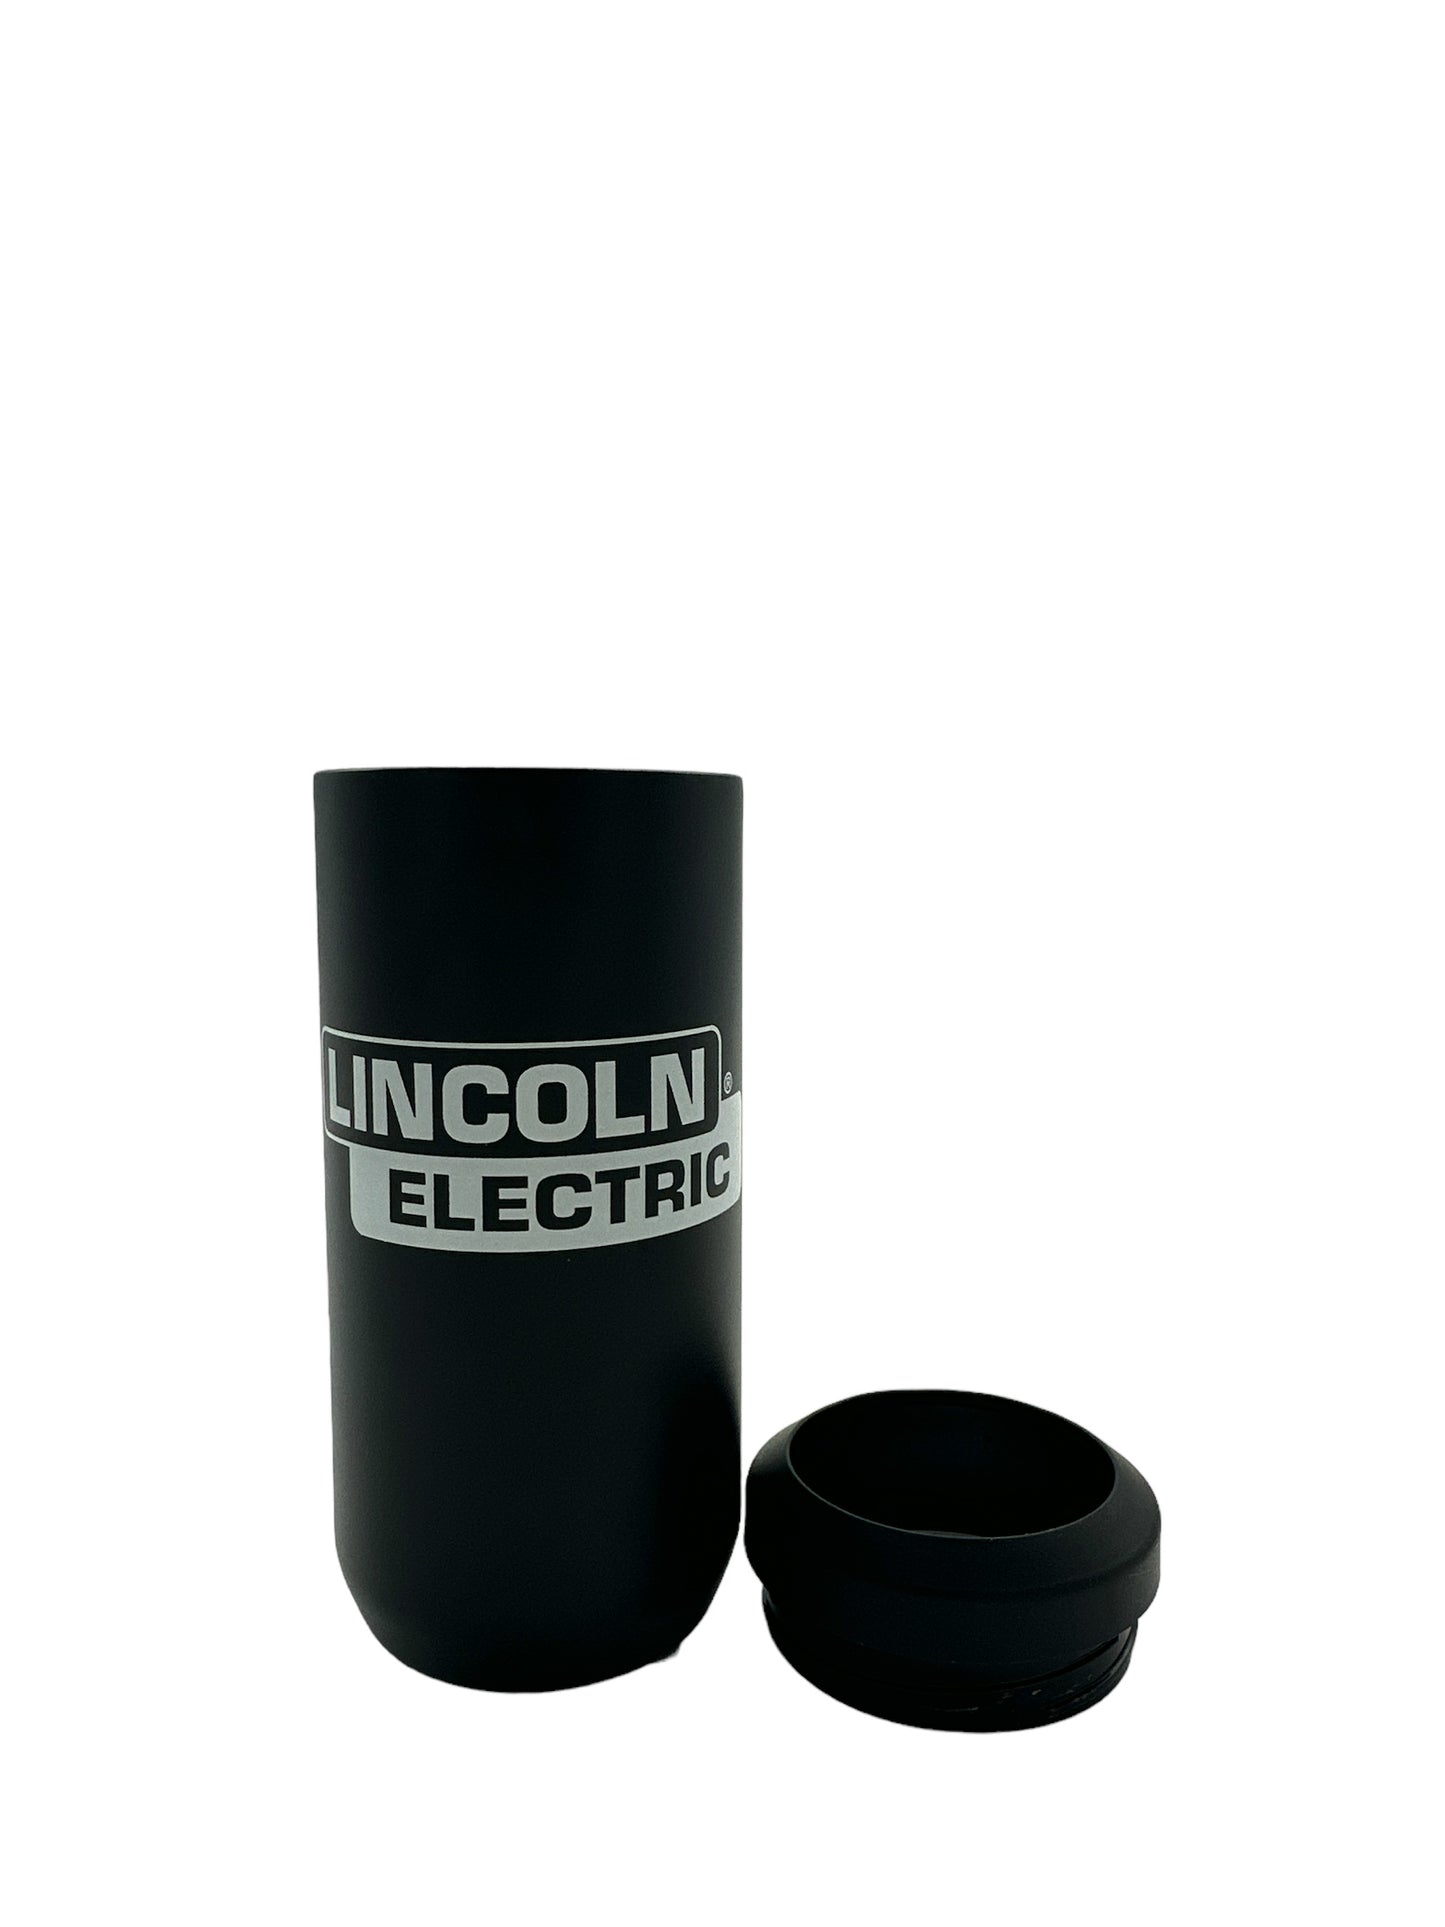 Lincoln Electric CamelBak Horizon 12 oz. Slim Can Hard Koozie, Insulated Stainless Steel